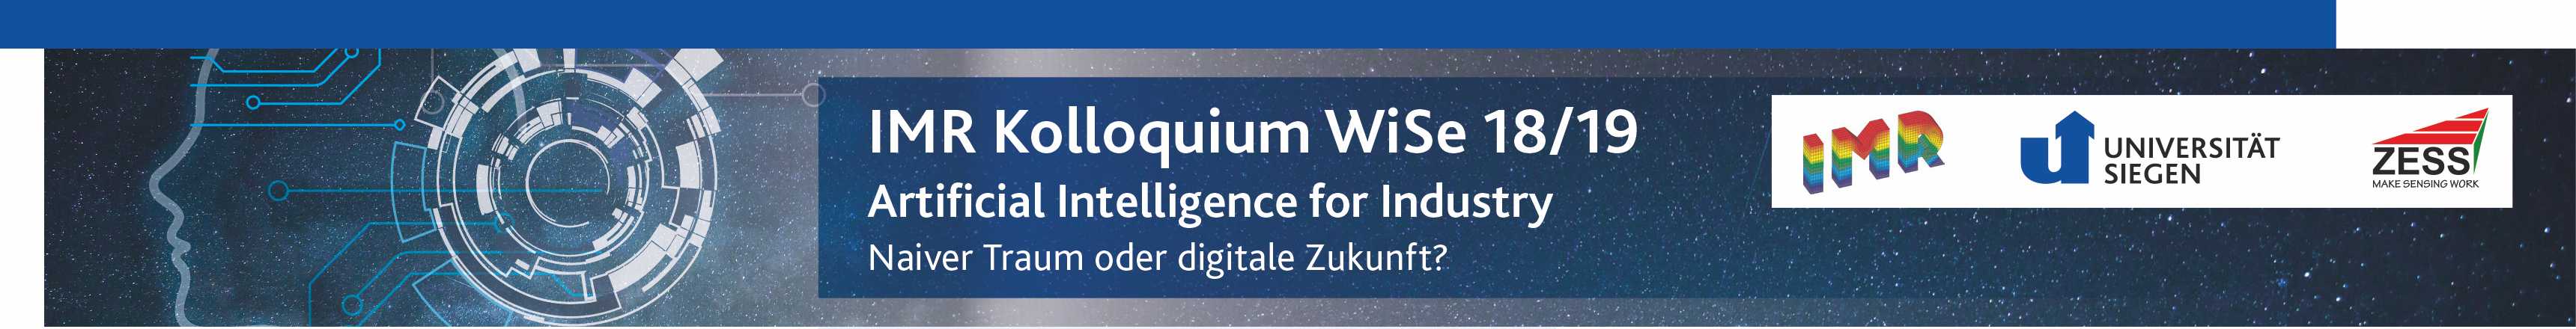 IMR Colloquium 18/19: Artificial Intelligence for Industry - Naive dream or digital future?